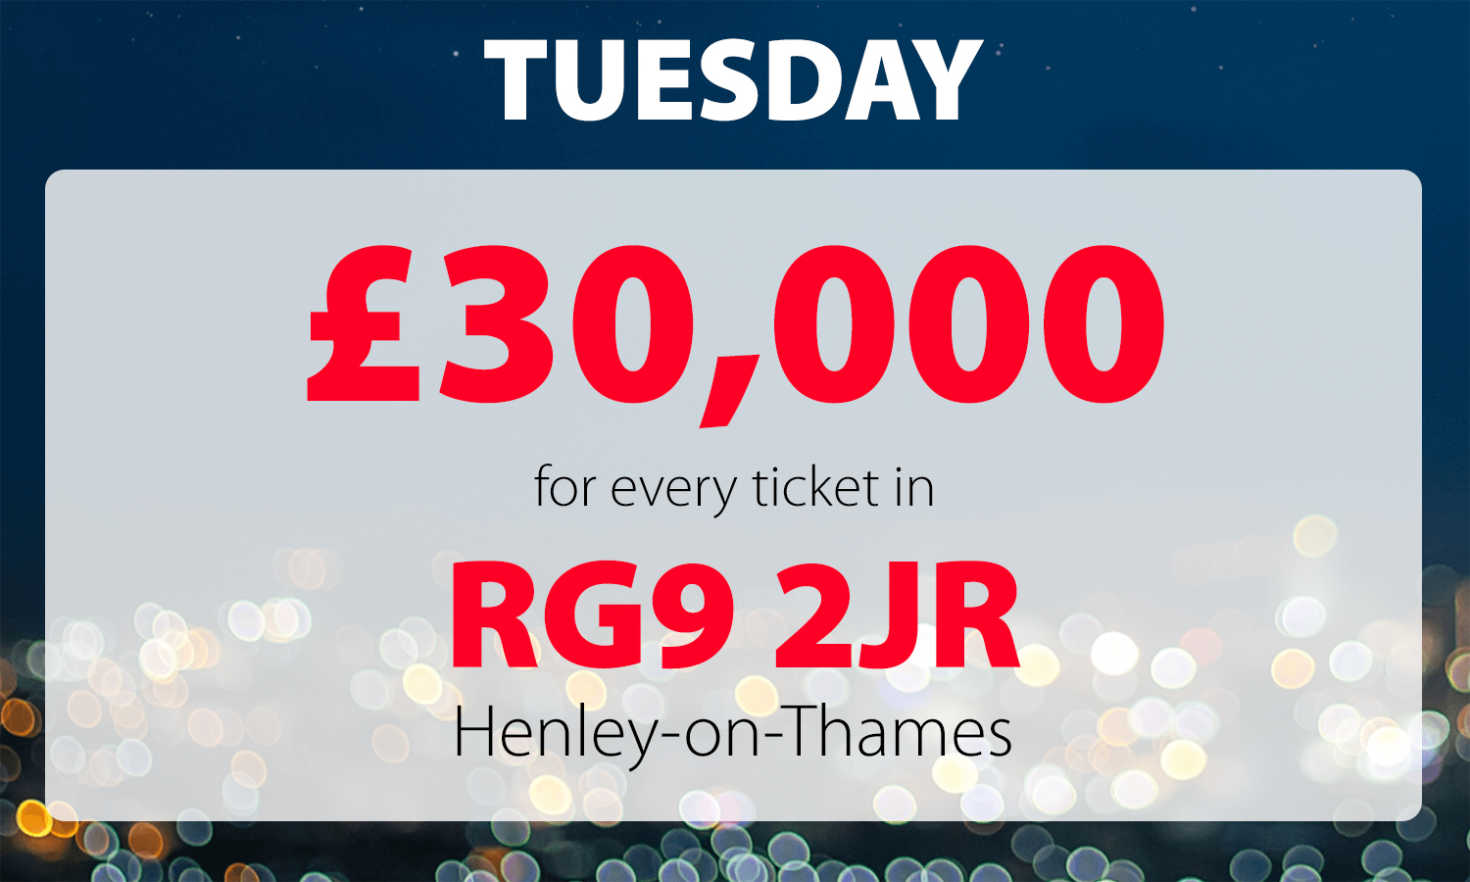 It's a happy Christmas for one player in postcode RG9 2JR who has won a whopping £30,000!